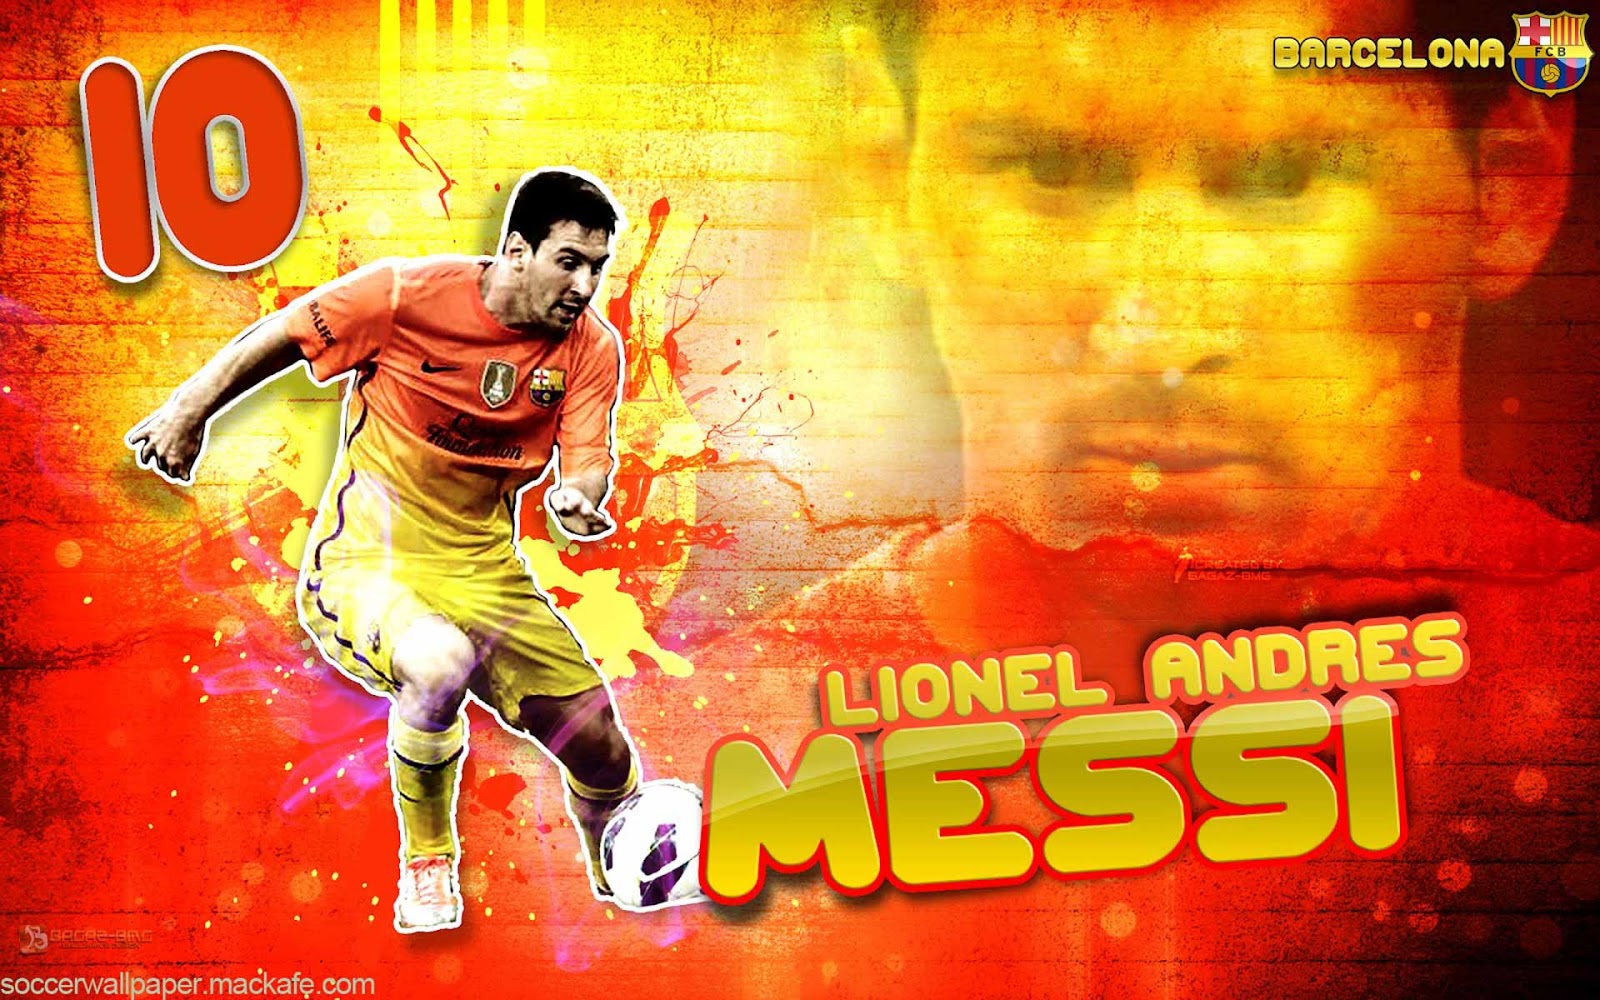 ... Messi View Lionel Messi pictures Tweet This Bookmark this on Delicious